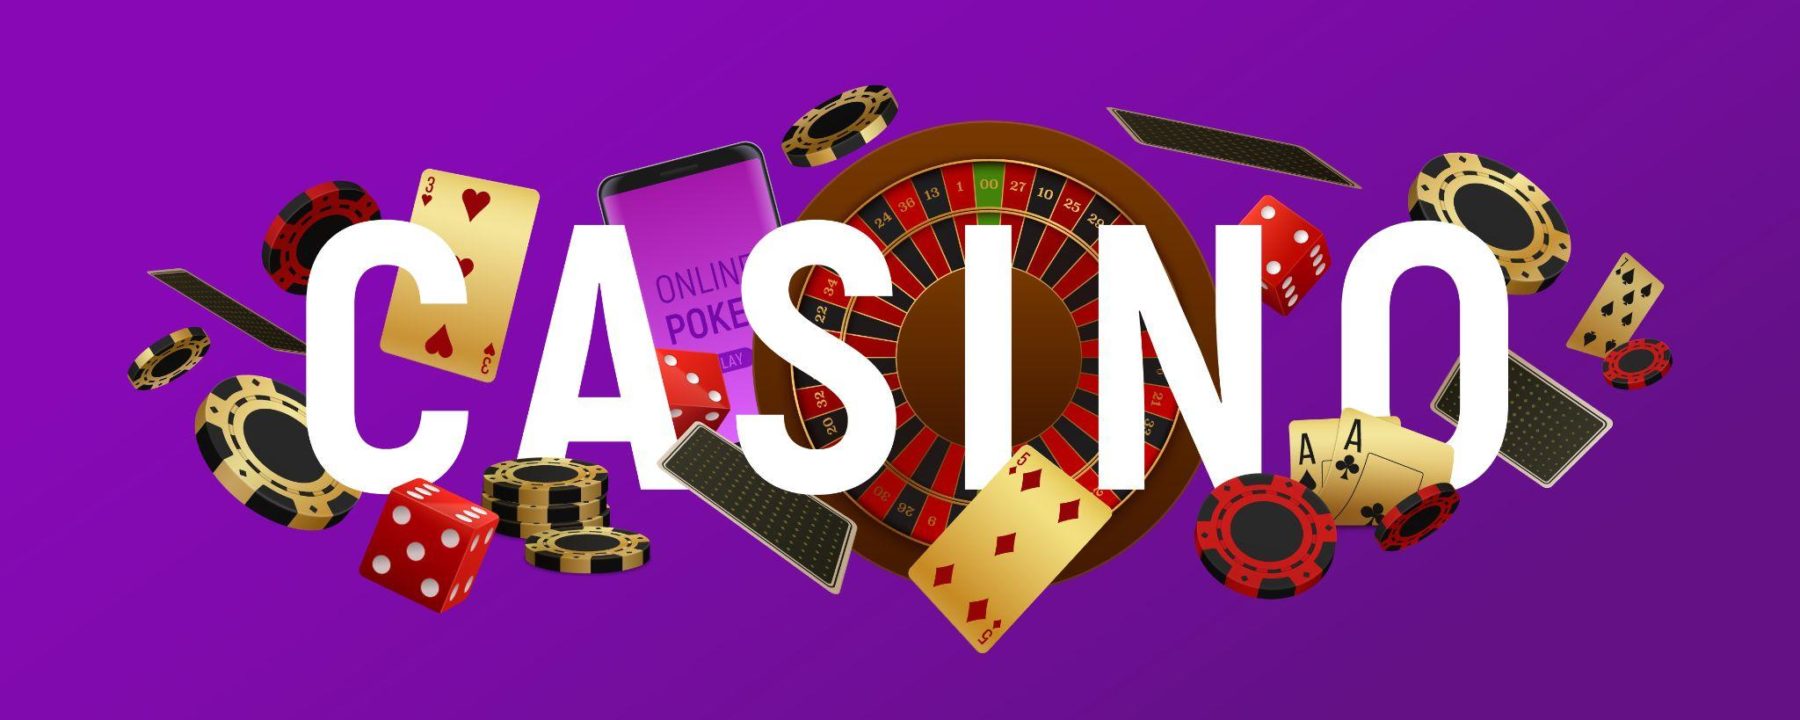 What Online Casino Game has the Best RTP? -